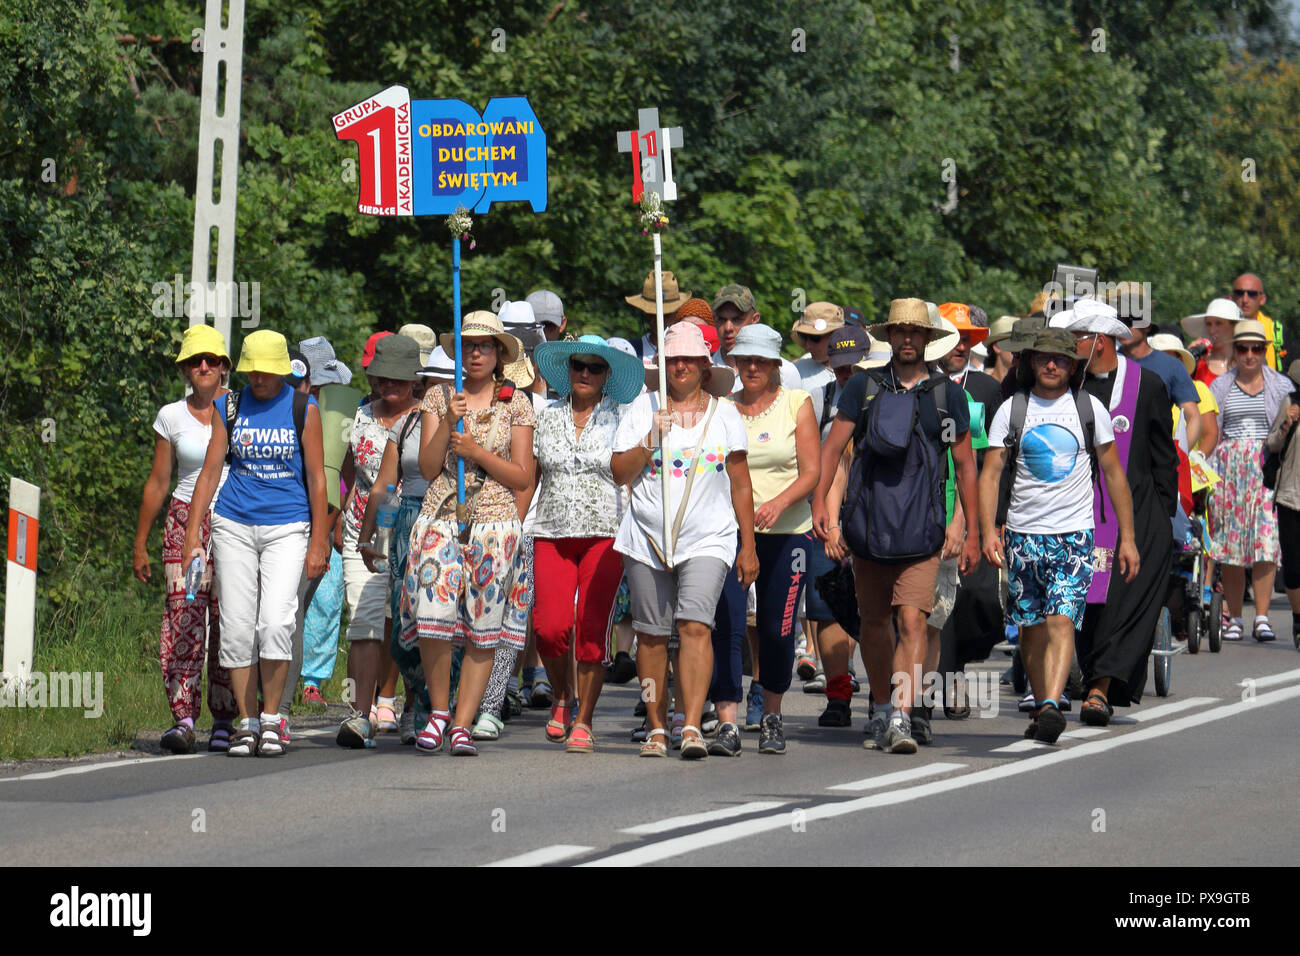 Group of pilgrims walk on the road during pilgrimage to the Monastery of Jasna Gora in Czestochowa, Poland for the annual feast of Assumption of Mary. Stock Photo